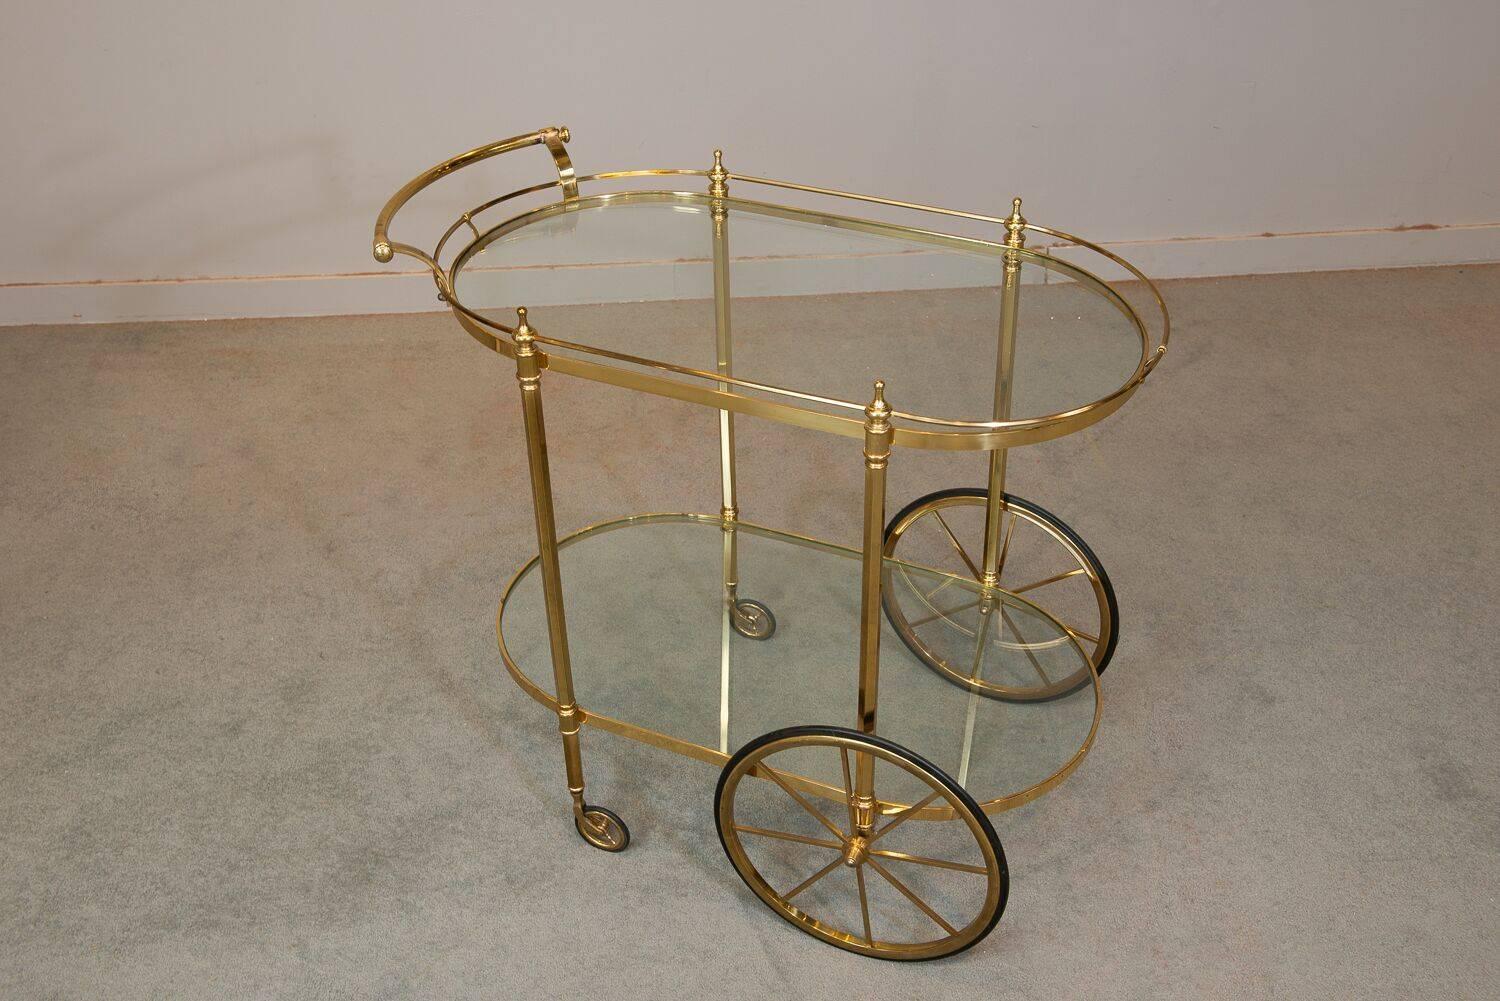 Midcentury French brass bar cart with glass tops. Space between shelves 20.25